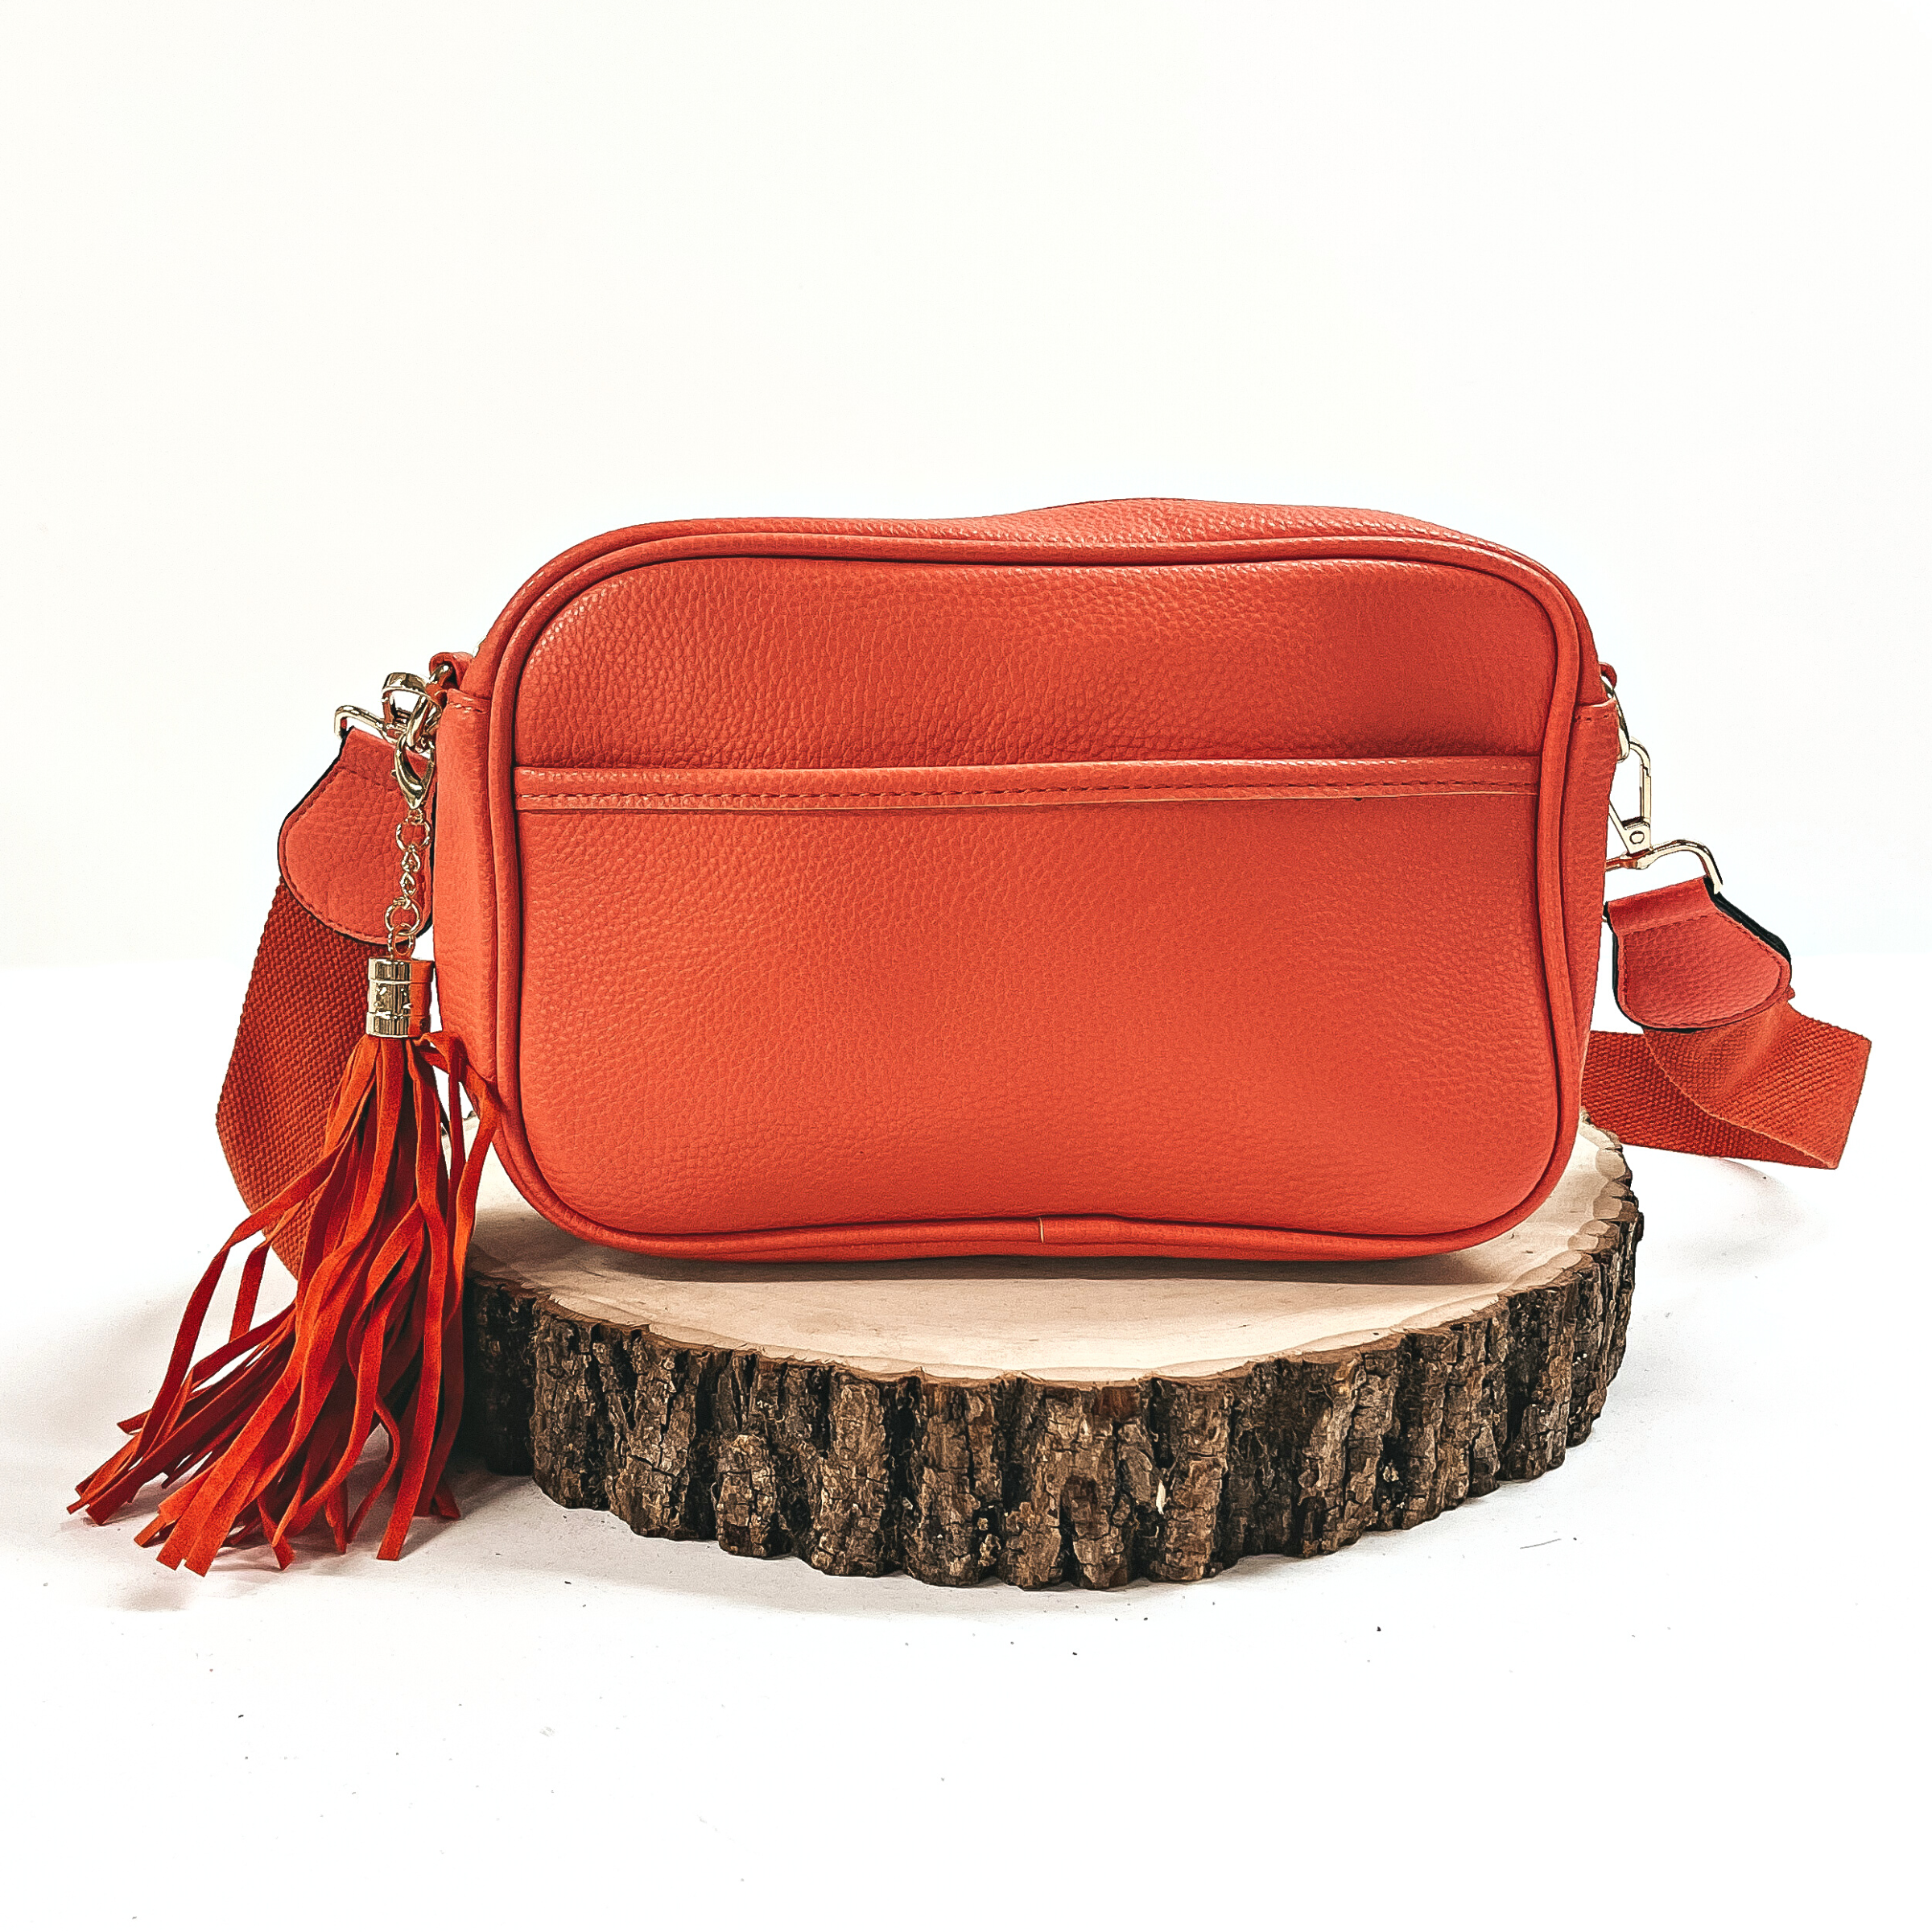 Lovin' Life Small Rectangle Crossbody Purse in Coral Orange - Giddy Up Glamour Boutique